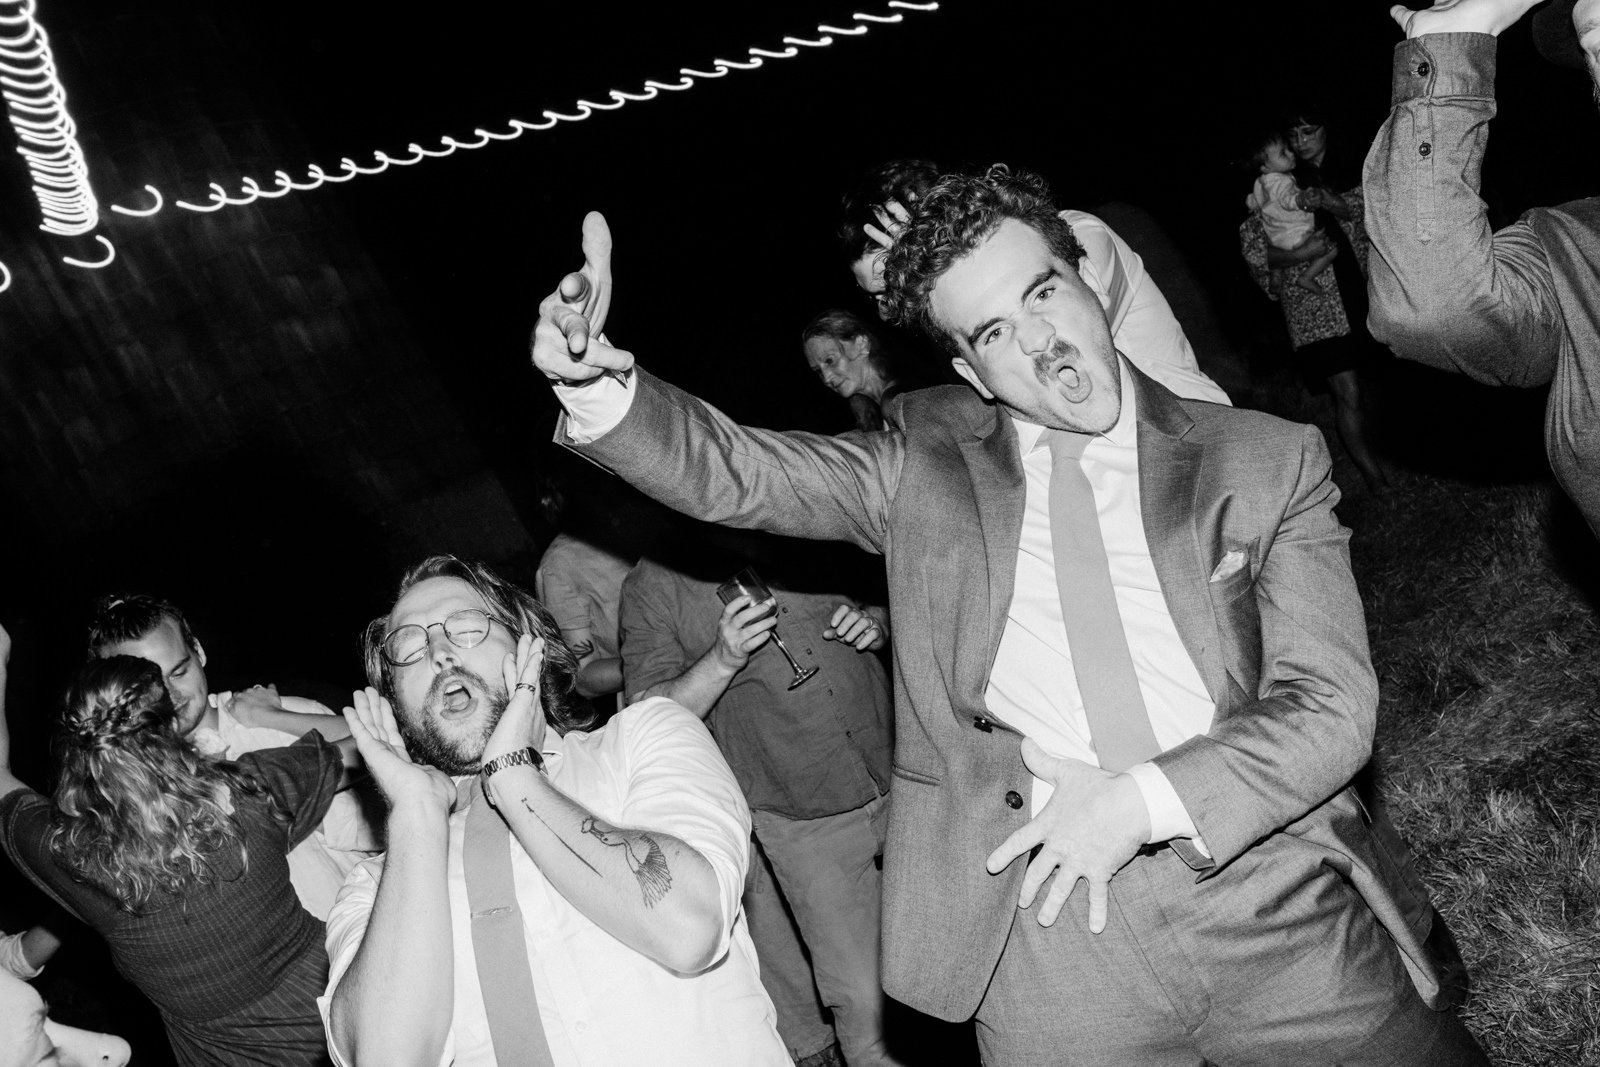  Funny photo of wedding guests dancing and yelling 